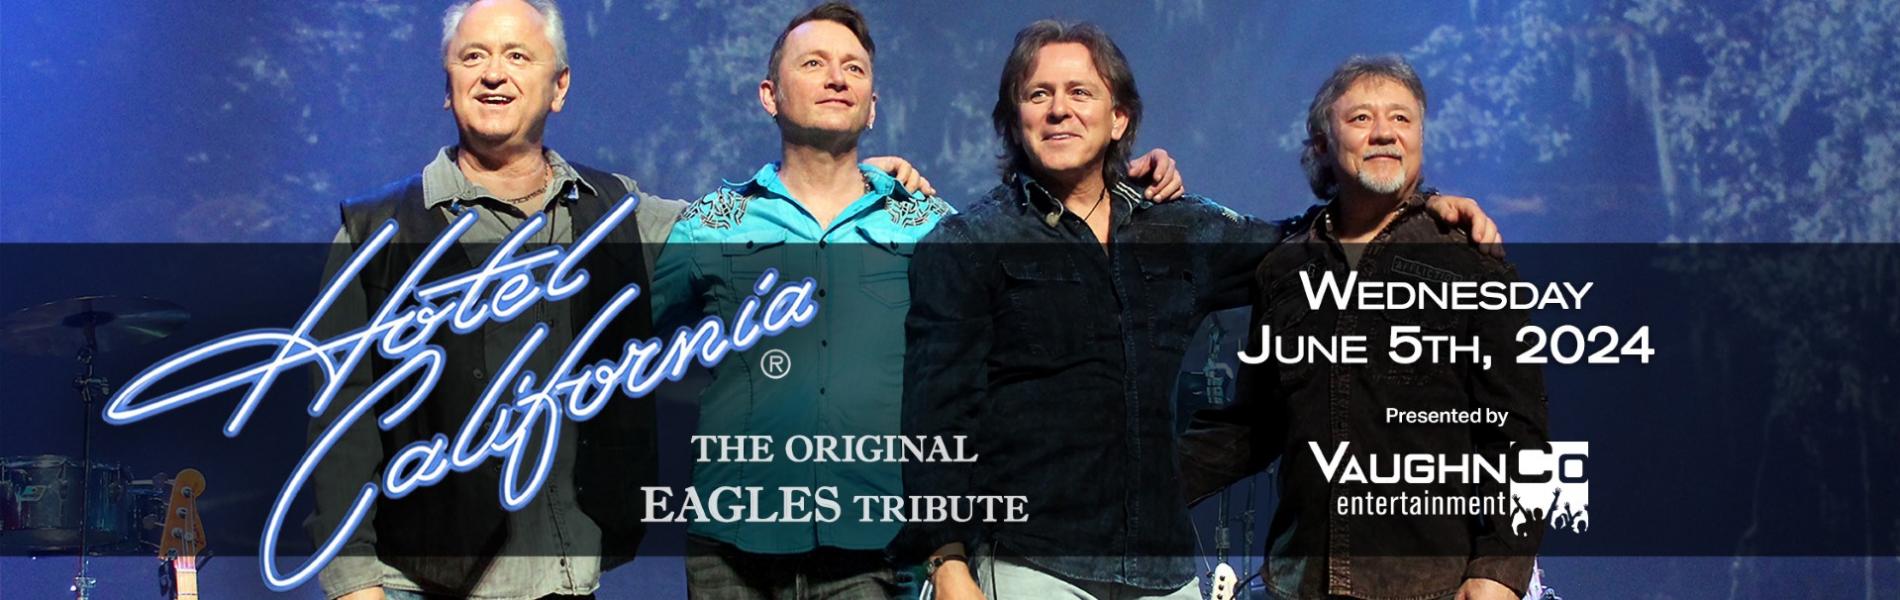 Four men standing with arms around each other.  The words Hotel California and the date June 5th 2024 are overlaid across the image.